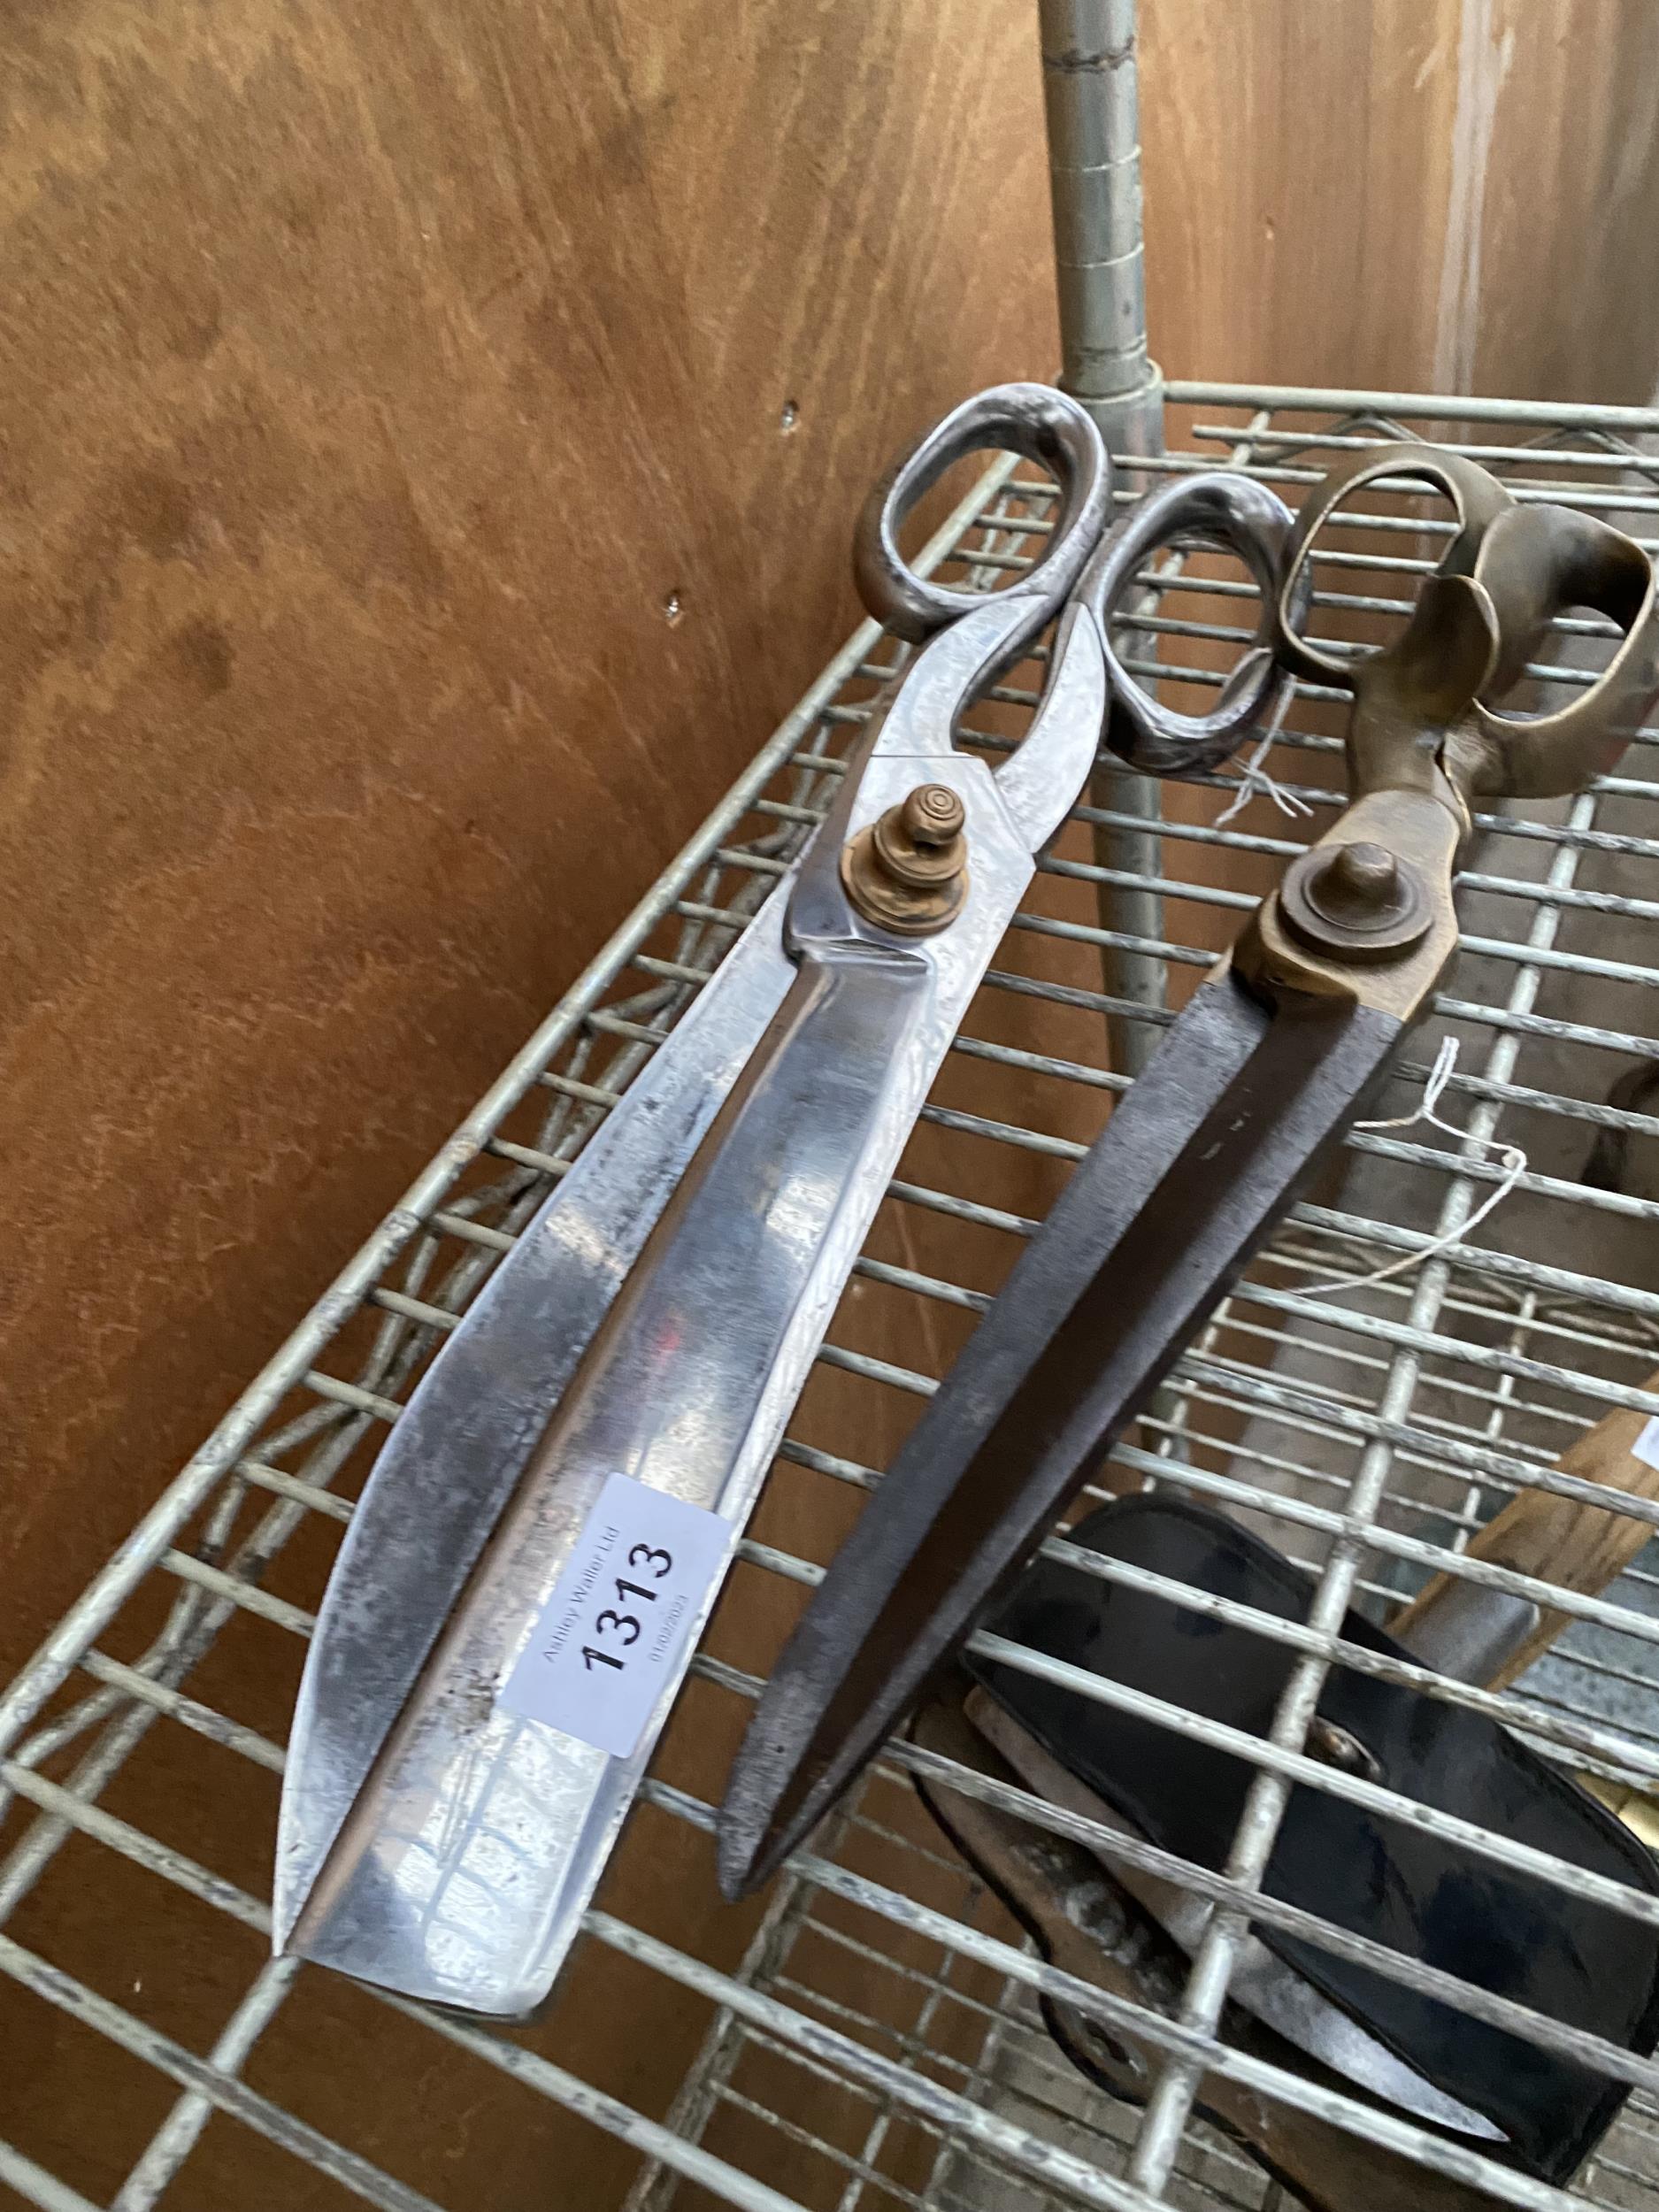 TWO PAIRS OF EXTREMELY LARGE SCISSORS